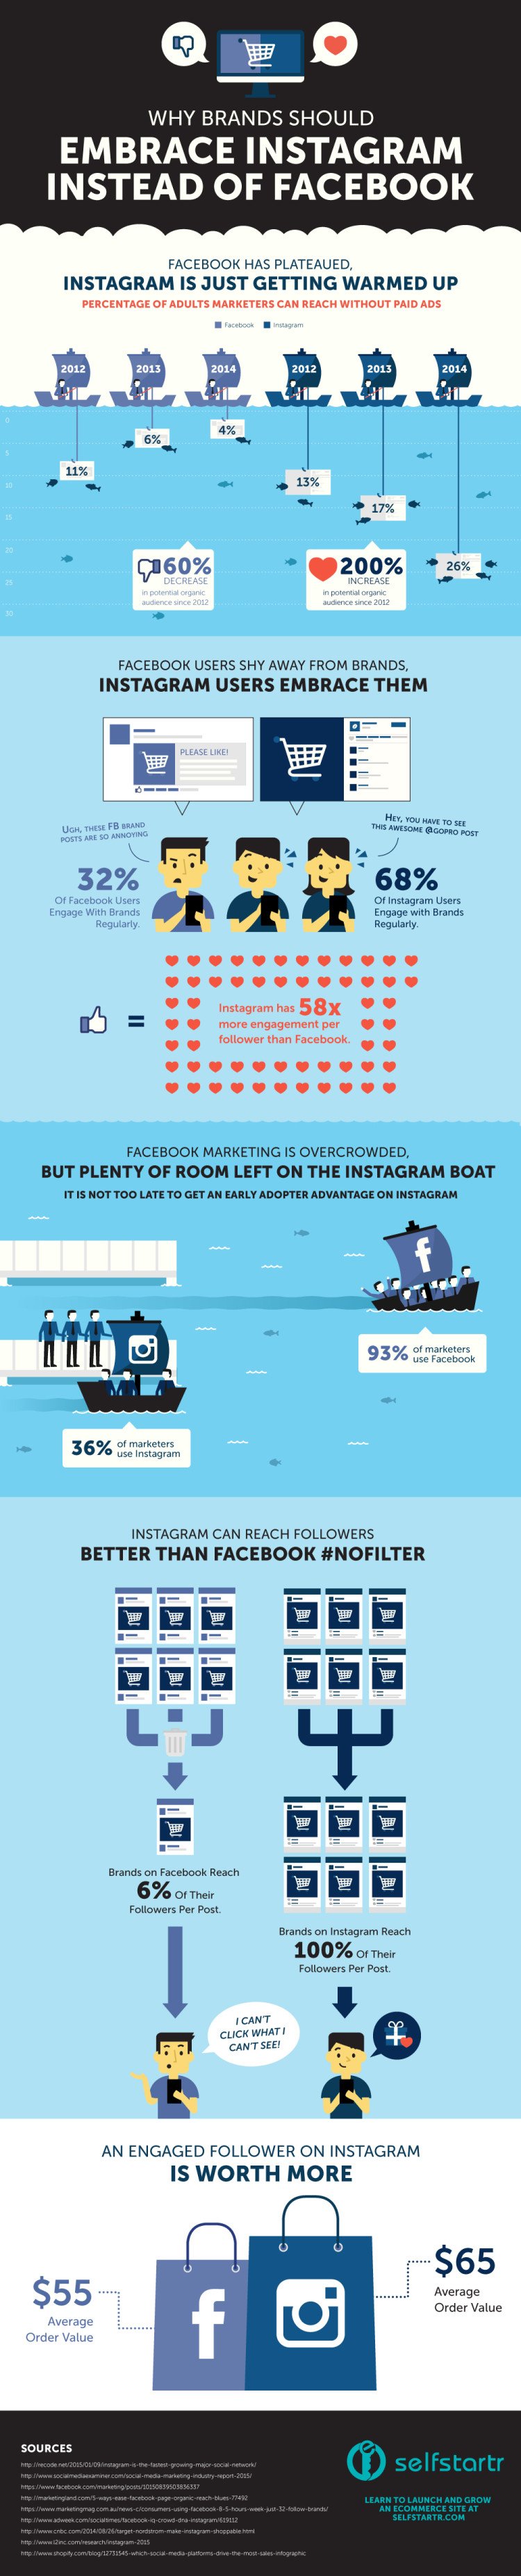 Why-Brands-Should-Embrace-Instagram-Instead-of-Facebook-INFOGRAPHIC-by-selfstartr